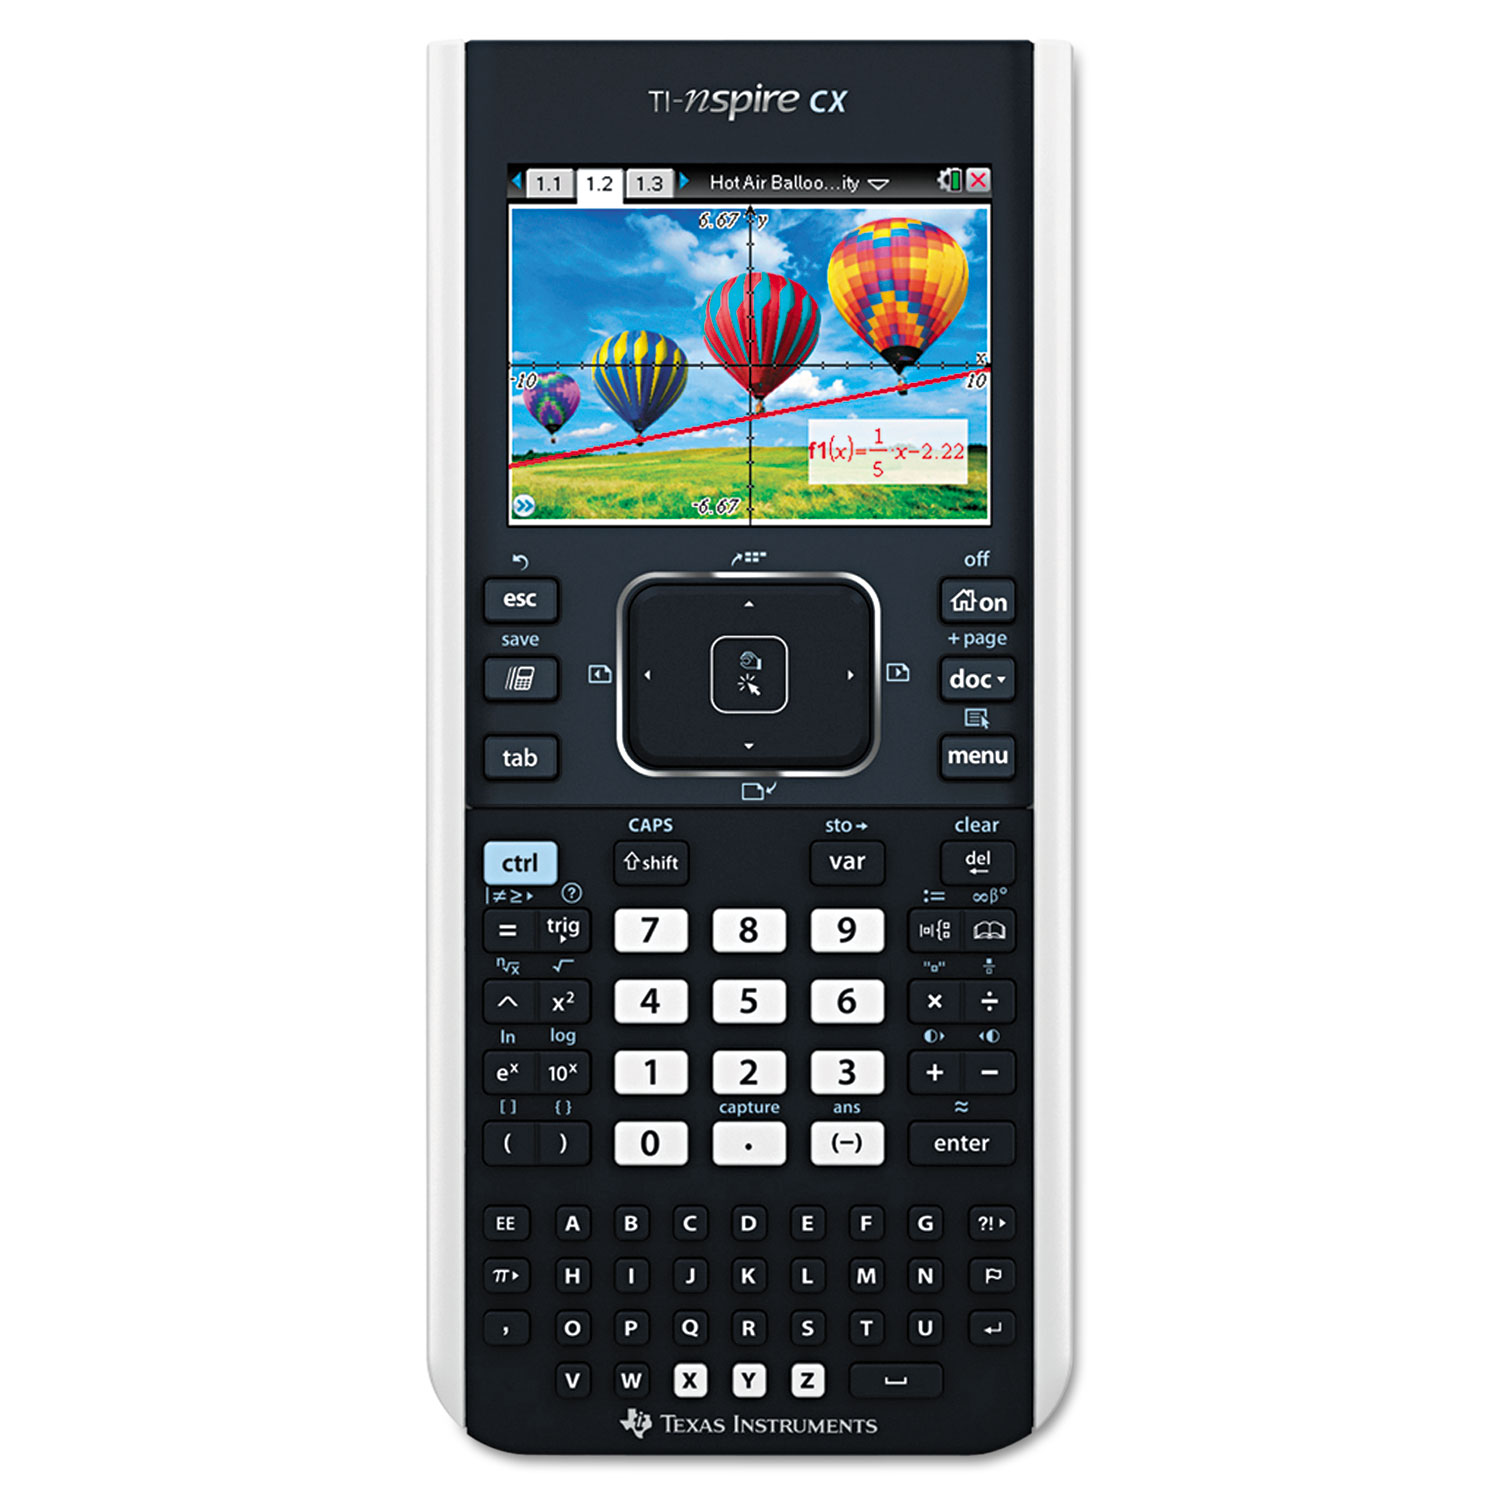 TI-Nspire CX Handheld Graphing Calculator with Full-Color Display